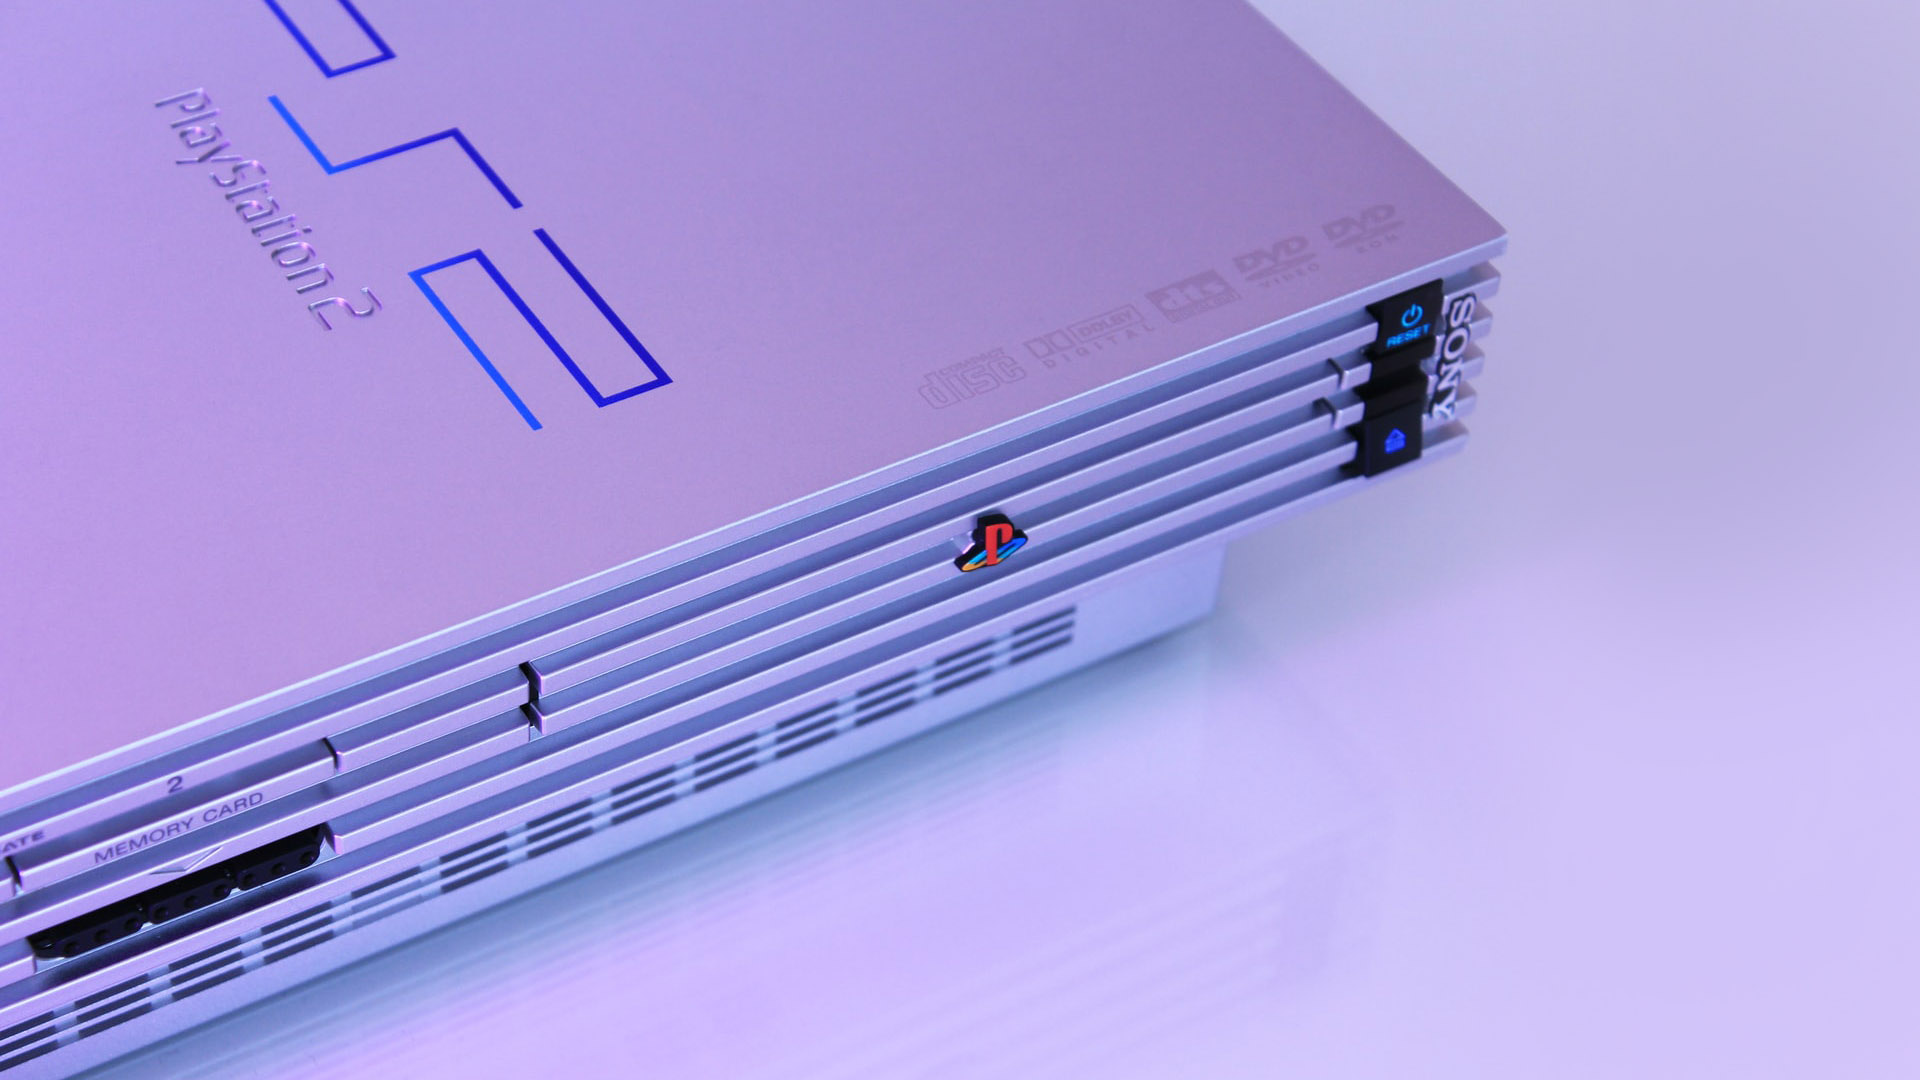 Sony Presents The Final Nail In The Coffin For The PlayStation 2